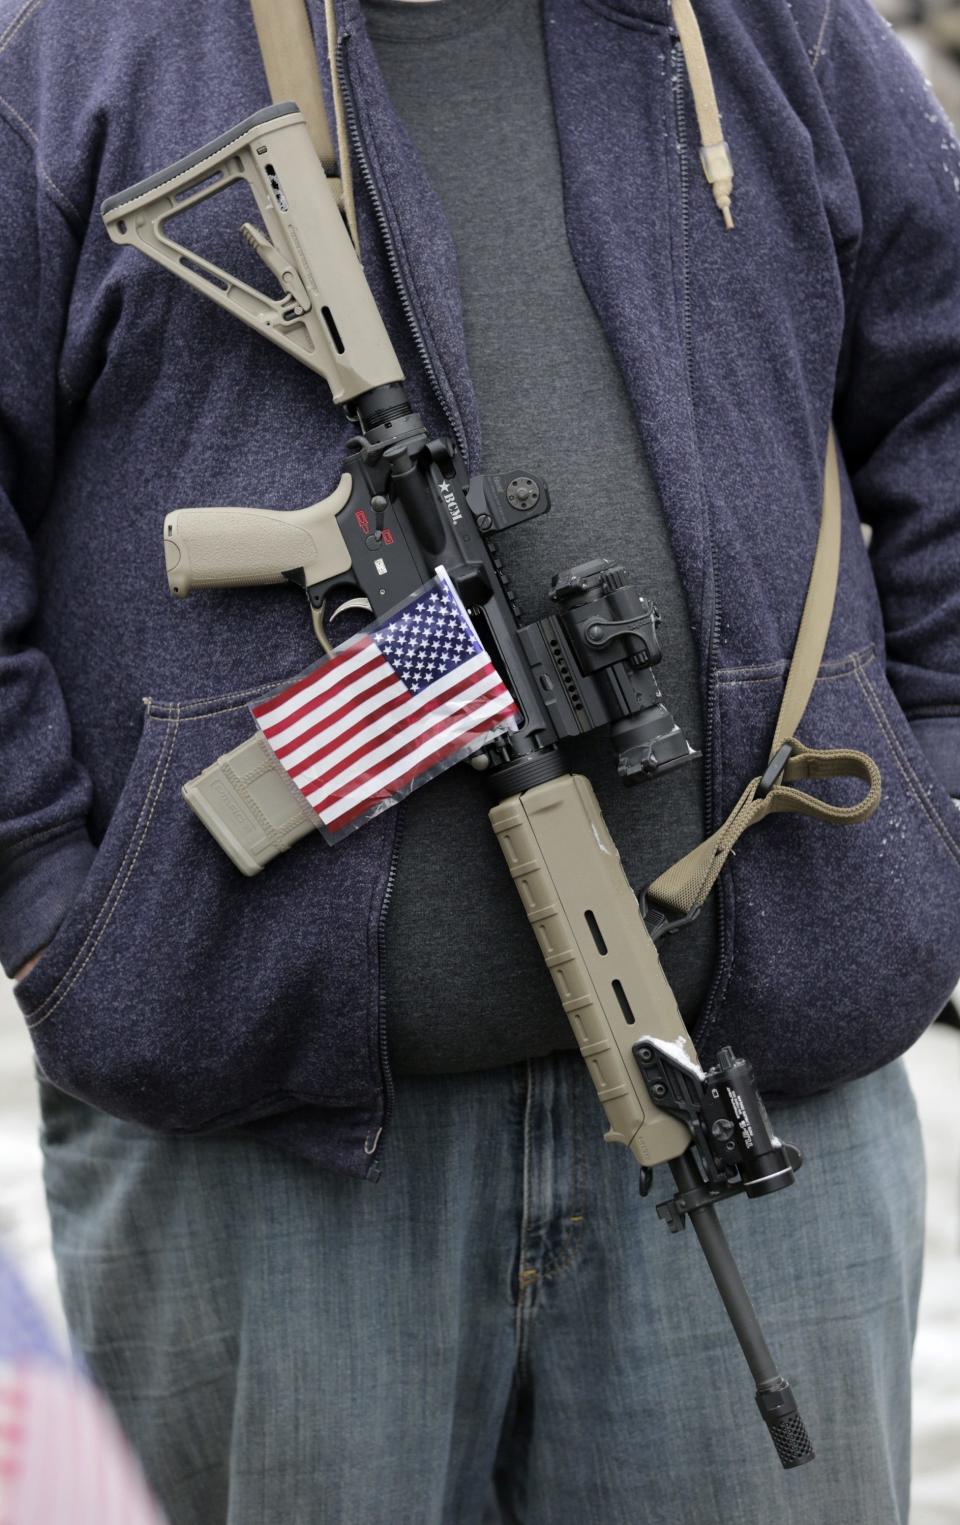 FILE - In this Saturday, Feb. 23, 2013 file photo, a gun-rights activist carries his rifle decorated with a U.S. flag during a "National Day of Resistance" rally at the Utah State Capitol in Salt Lake City, Utah